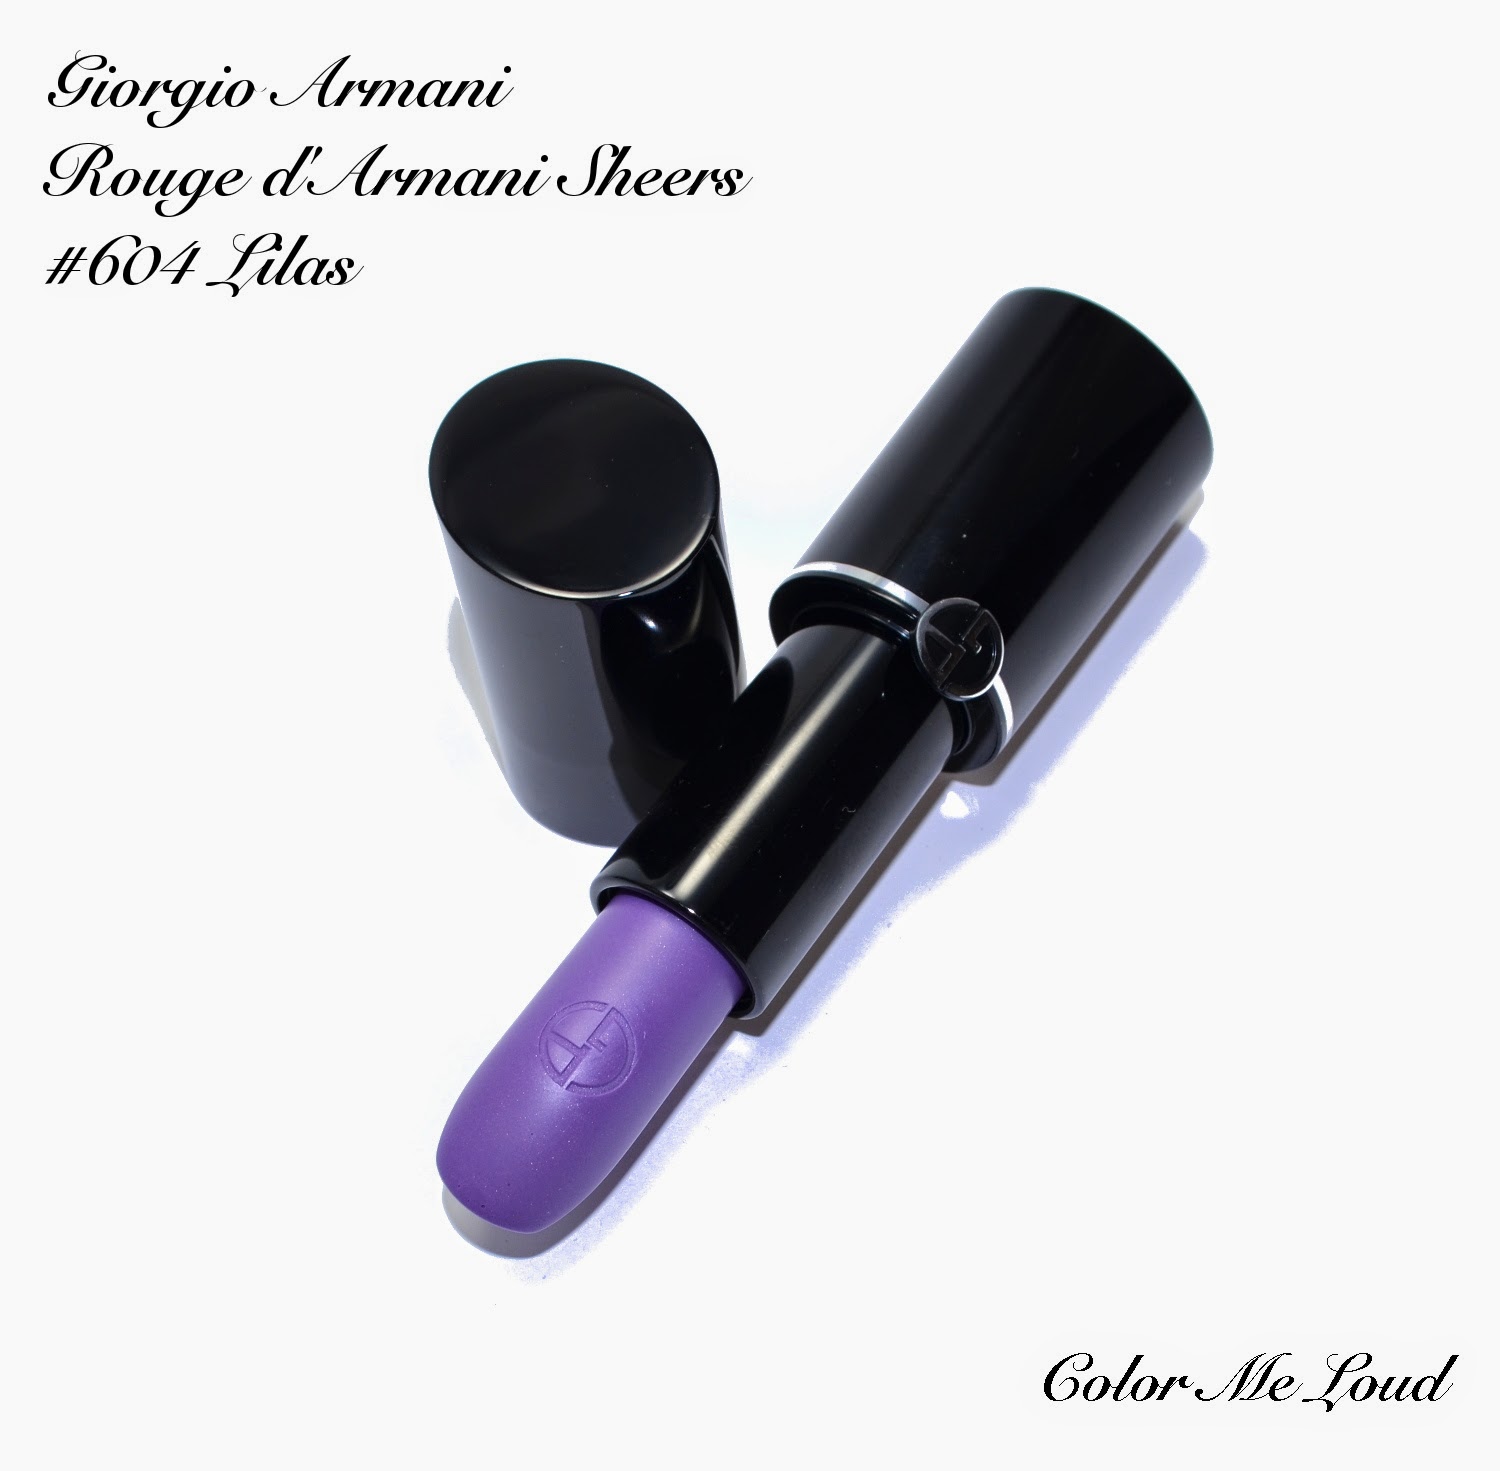 Giorgio Armani Rouge d'Armani Sheers #604 Lilas from Bright Ribbon Collection for Summer 2014, Review, Swatch & FOTD  